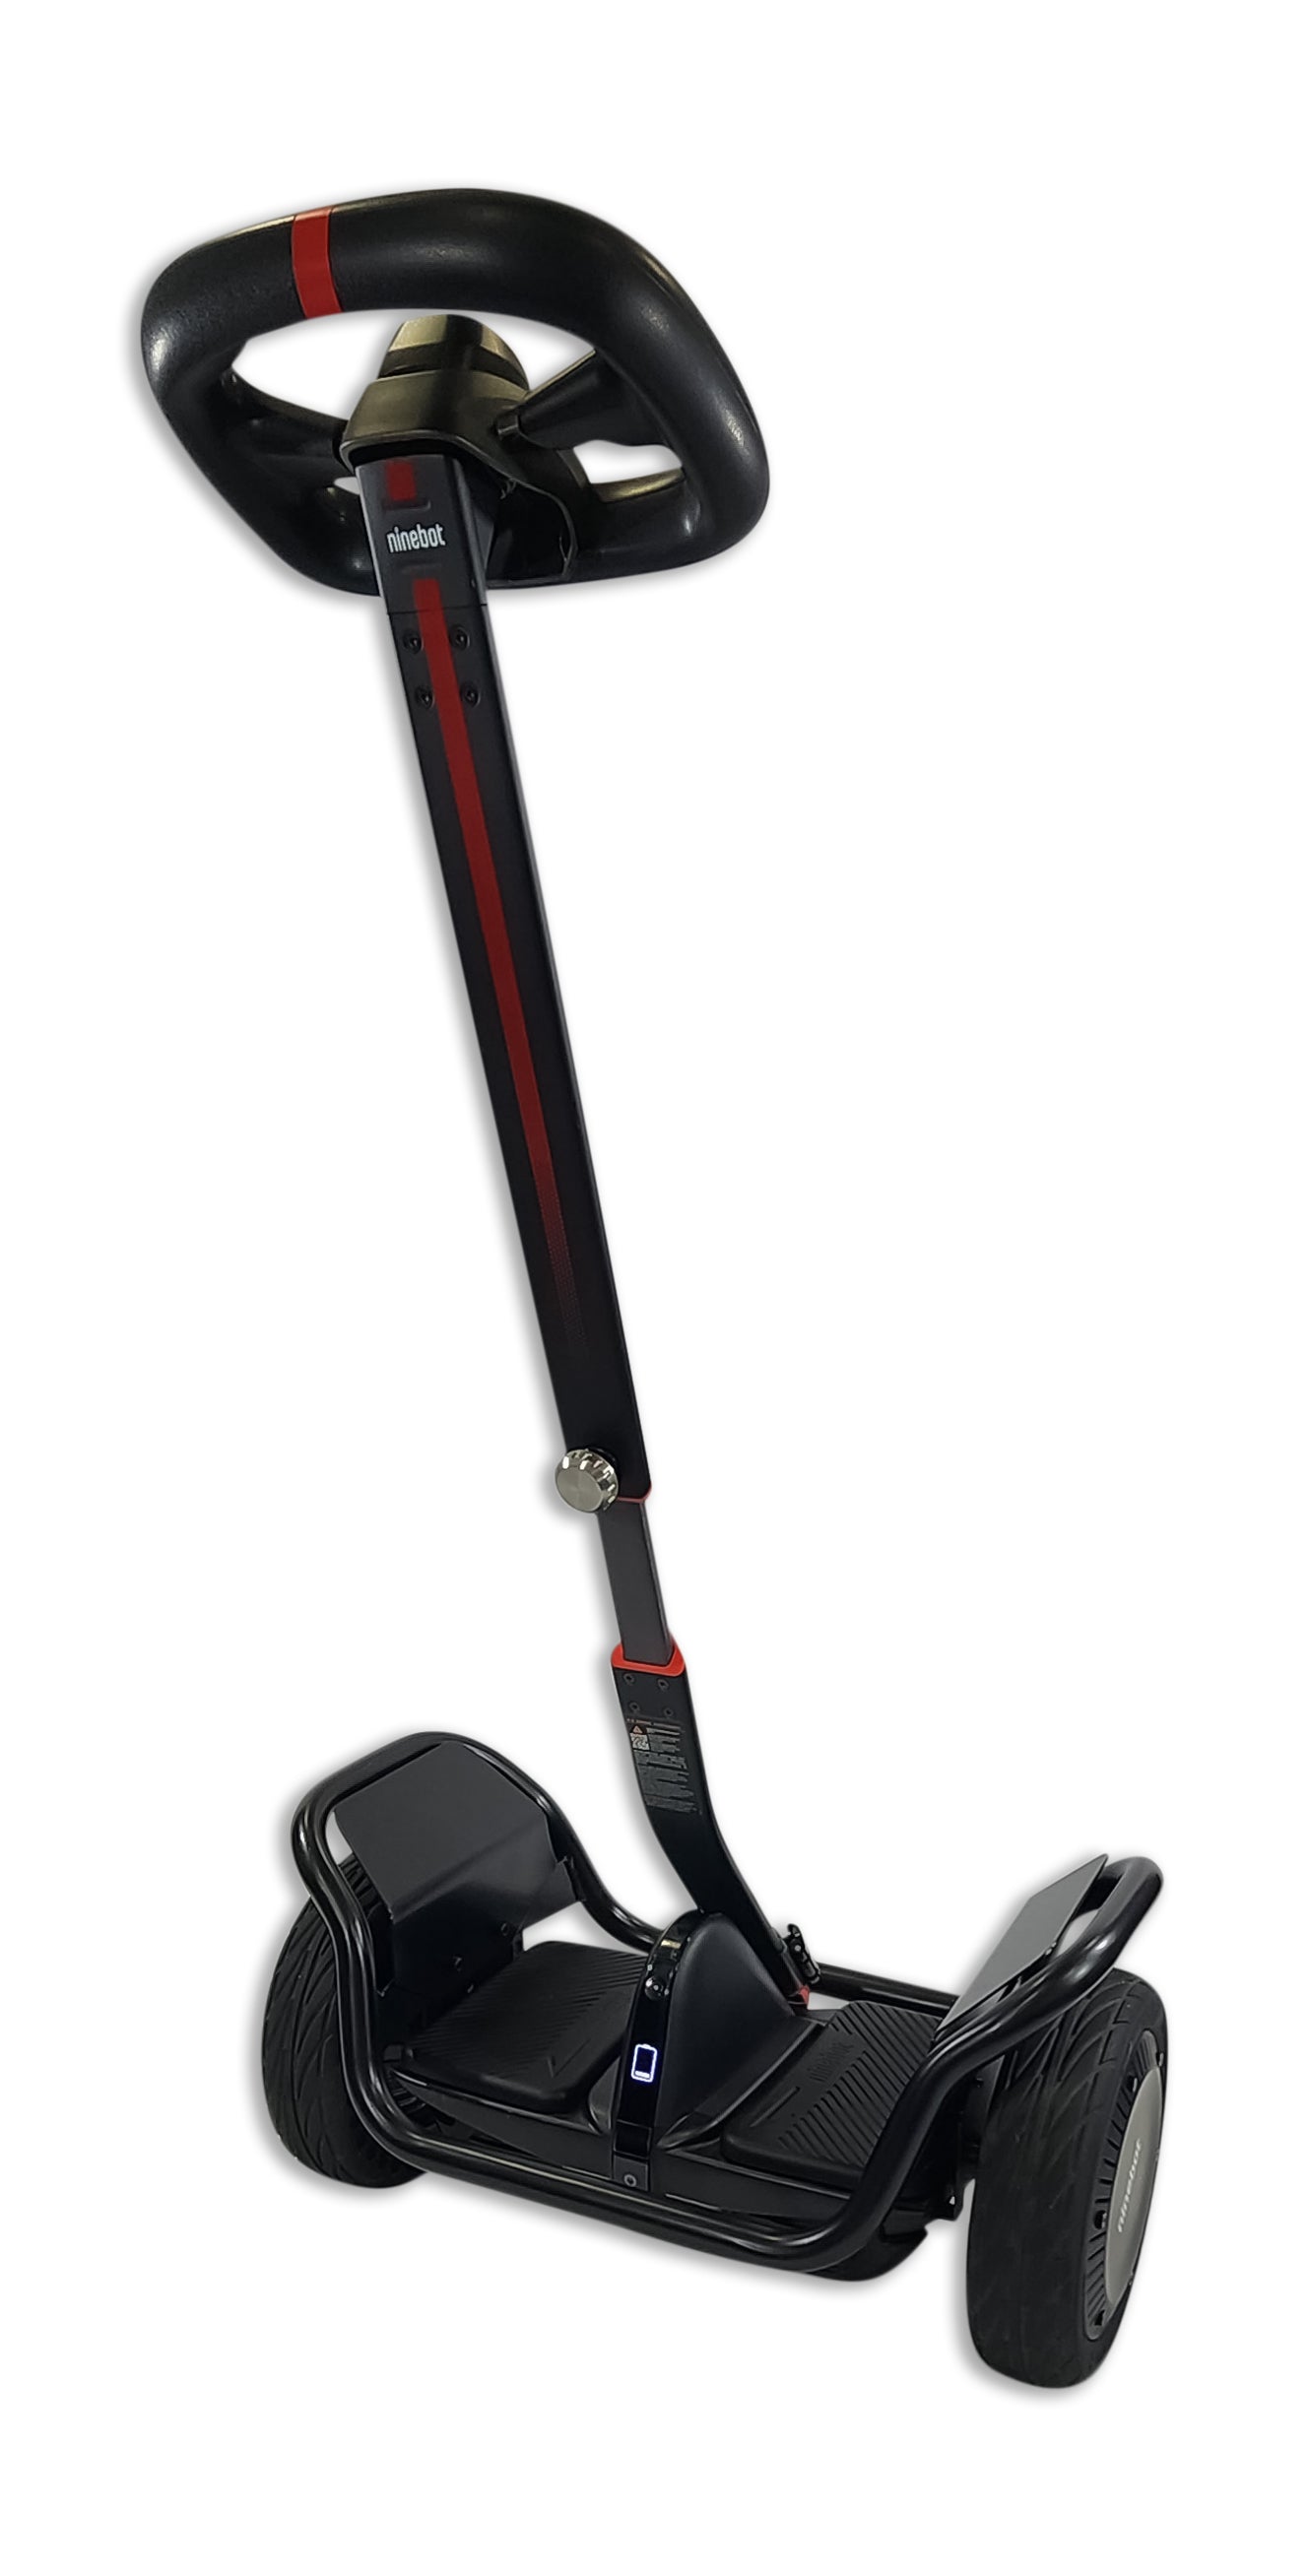 Segway Ninebot S-Max Smart Self-Balancing Electric Scooter Scout Edition